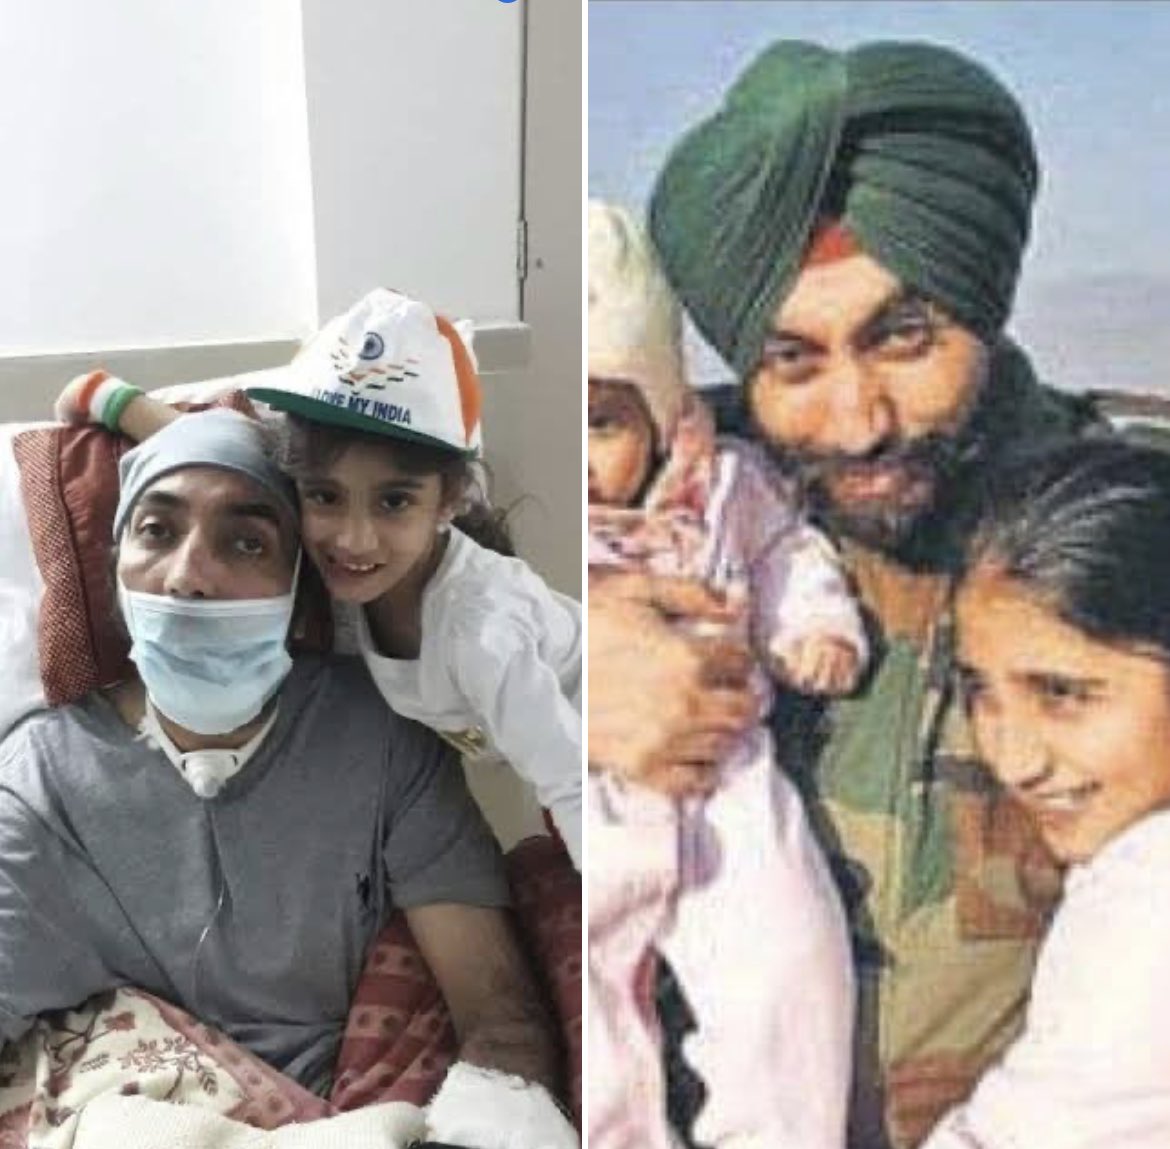 Lt Colonel Karanbir Singh Natt Sir..( SenaMedal ) who sustained a grievous injury fighting terrorists in Kashmir in 2015. 

He breathed his last yesterday at Military Hospital Jalandhar after being in coma for 8 years.

#KargilWar